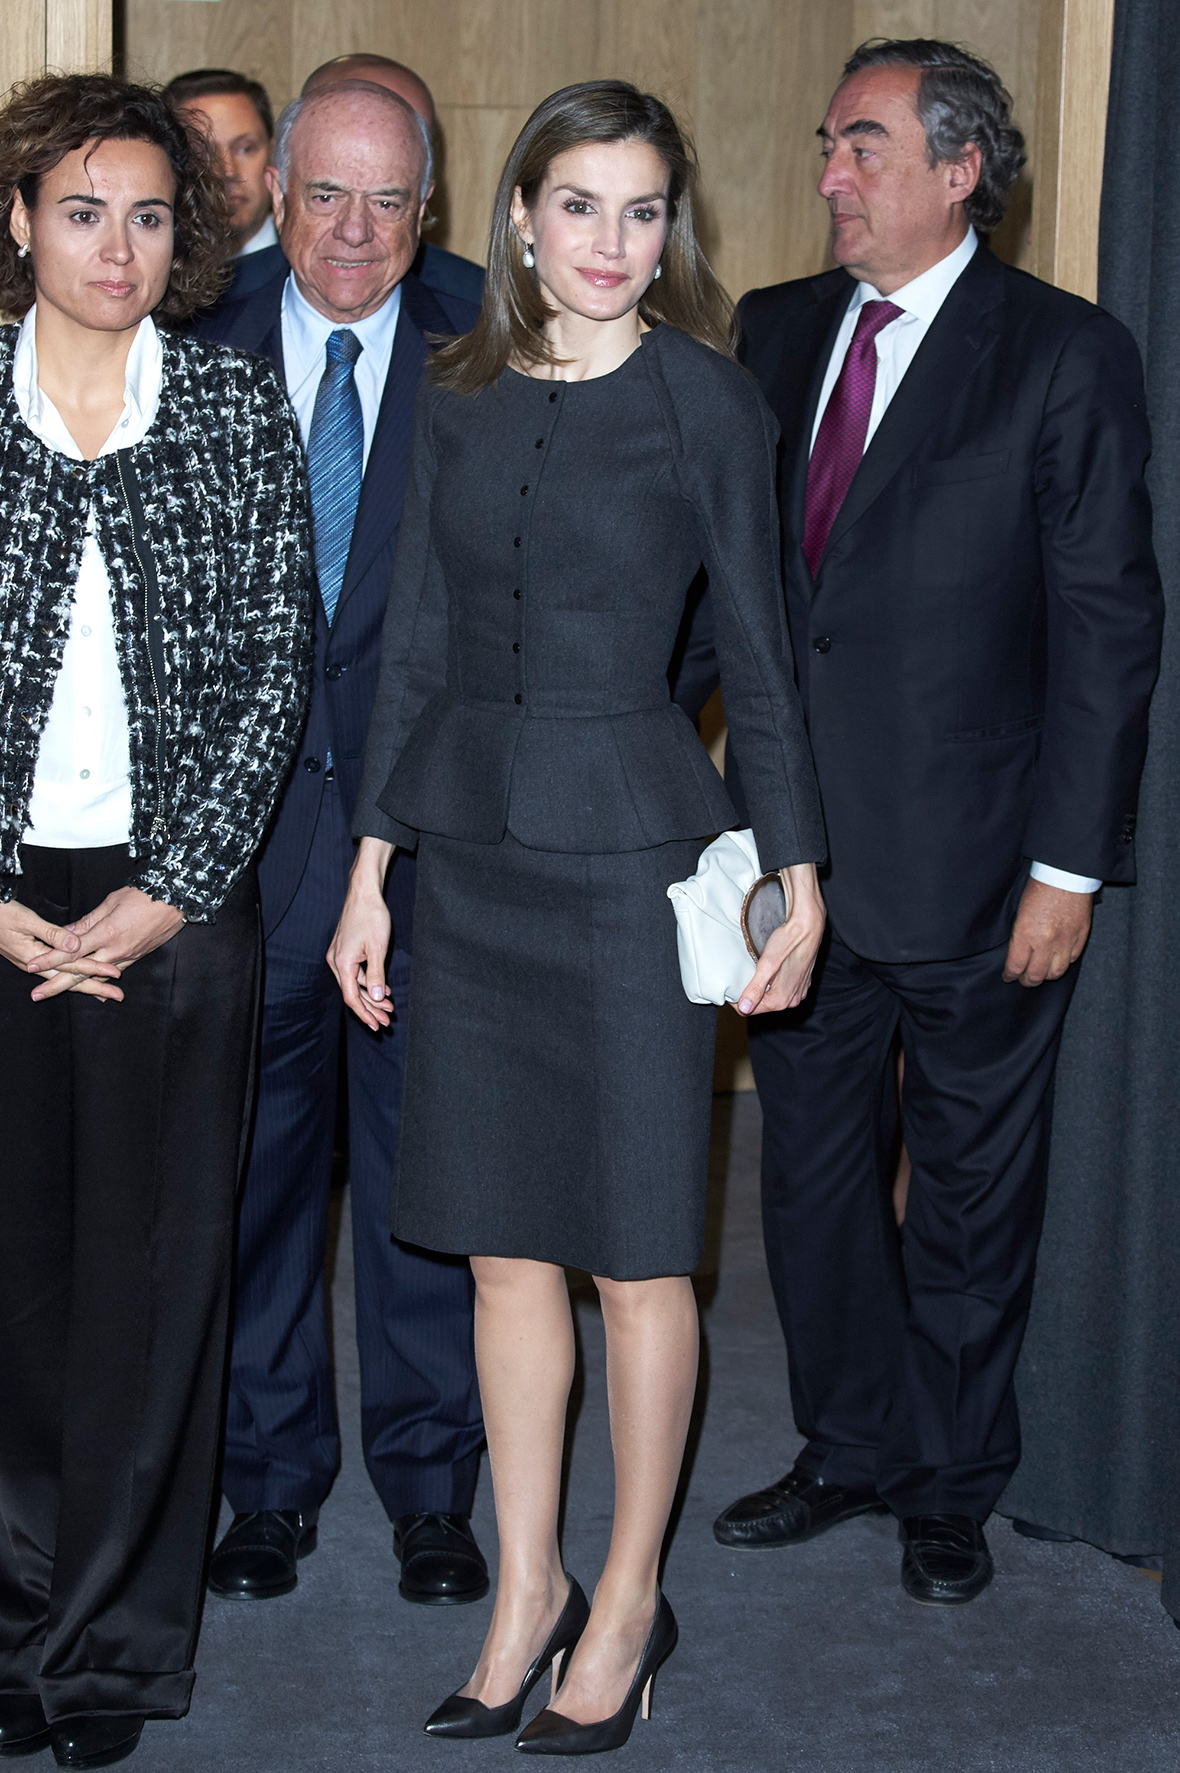 Classic Queen: Letizia of Spain highlights lithe waist in 